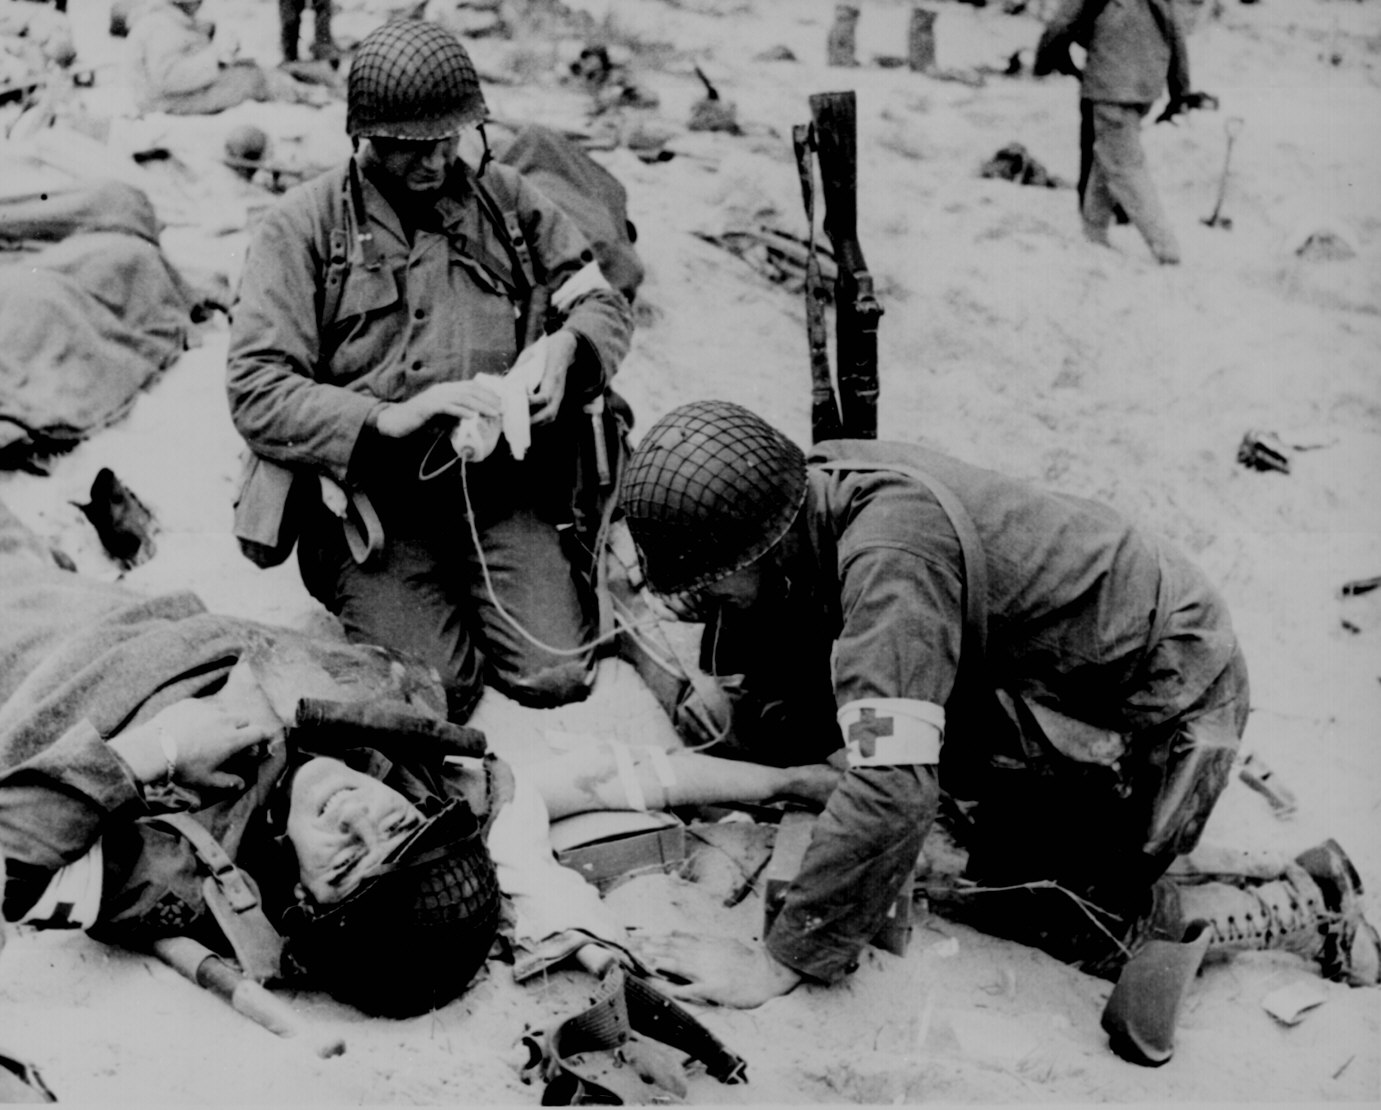 [Medics+and+Wounded+France+1944.jpg]